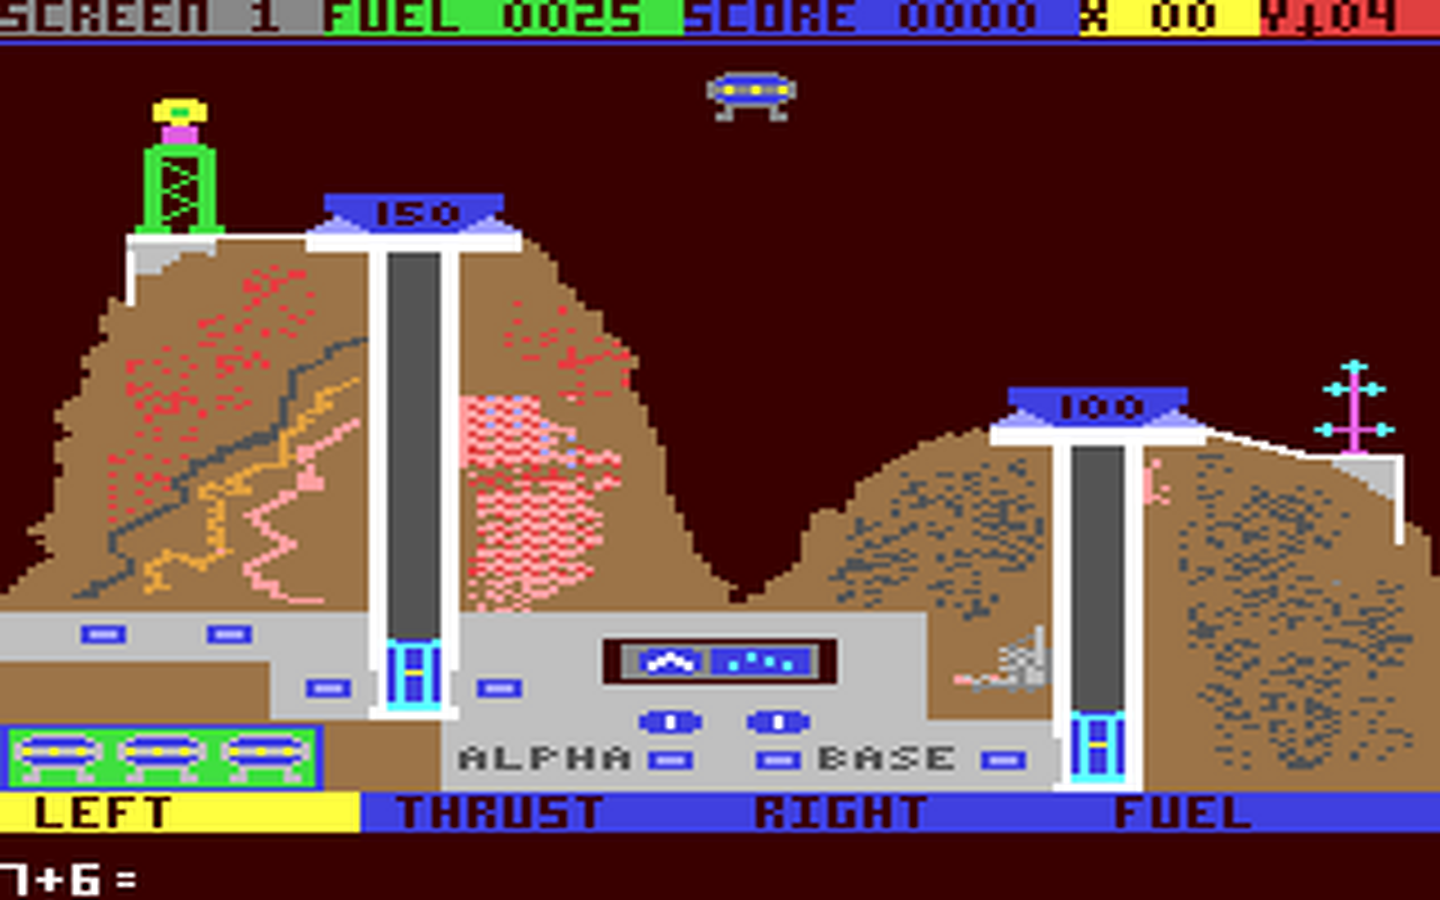 C64 GameBase Space_Math IntraCorp,_Inc. 1988